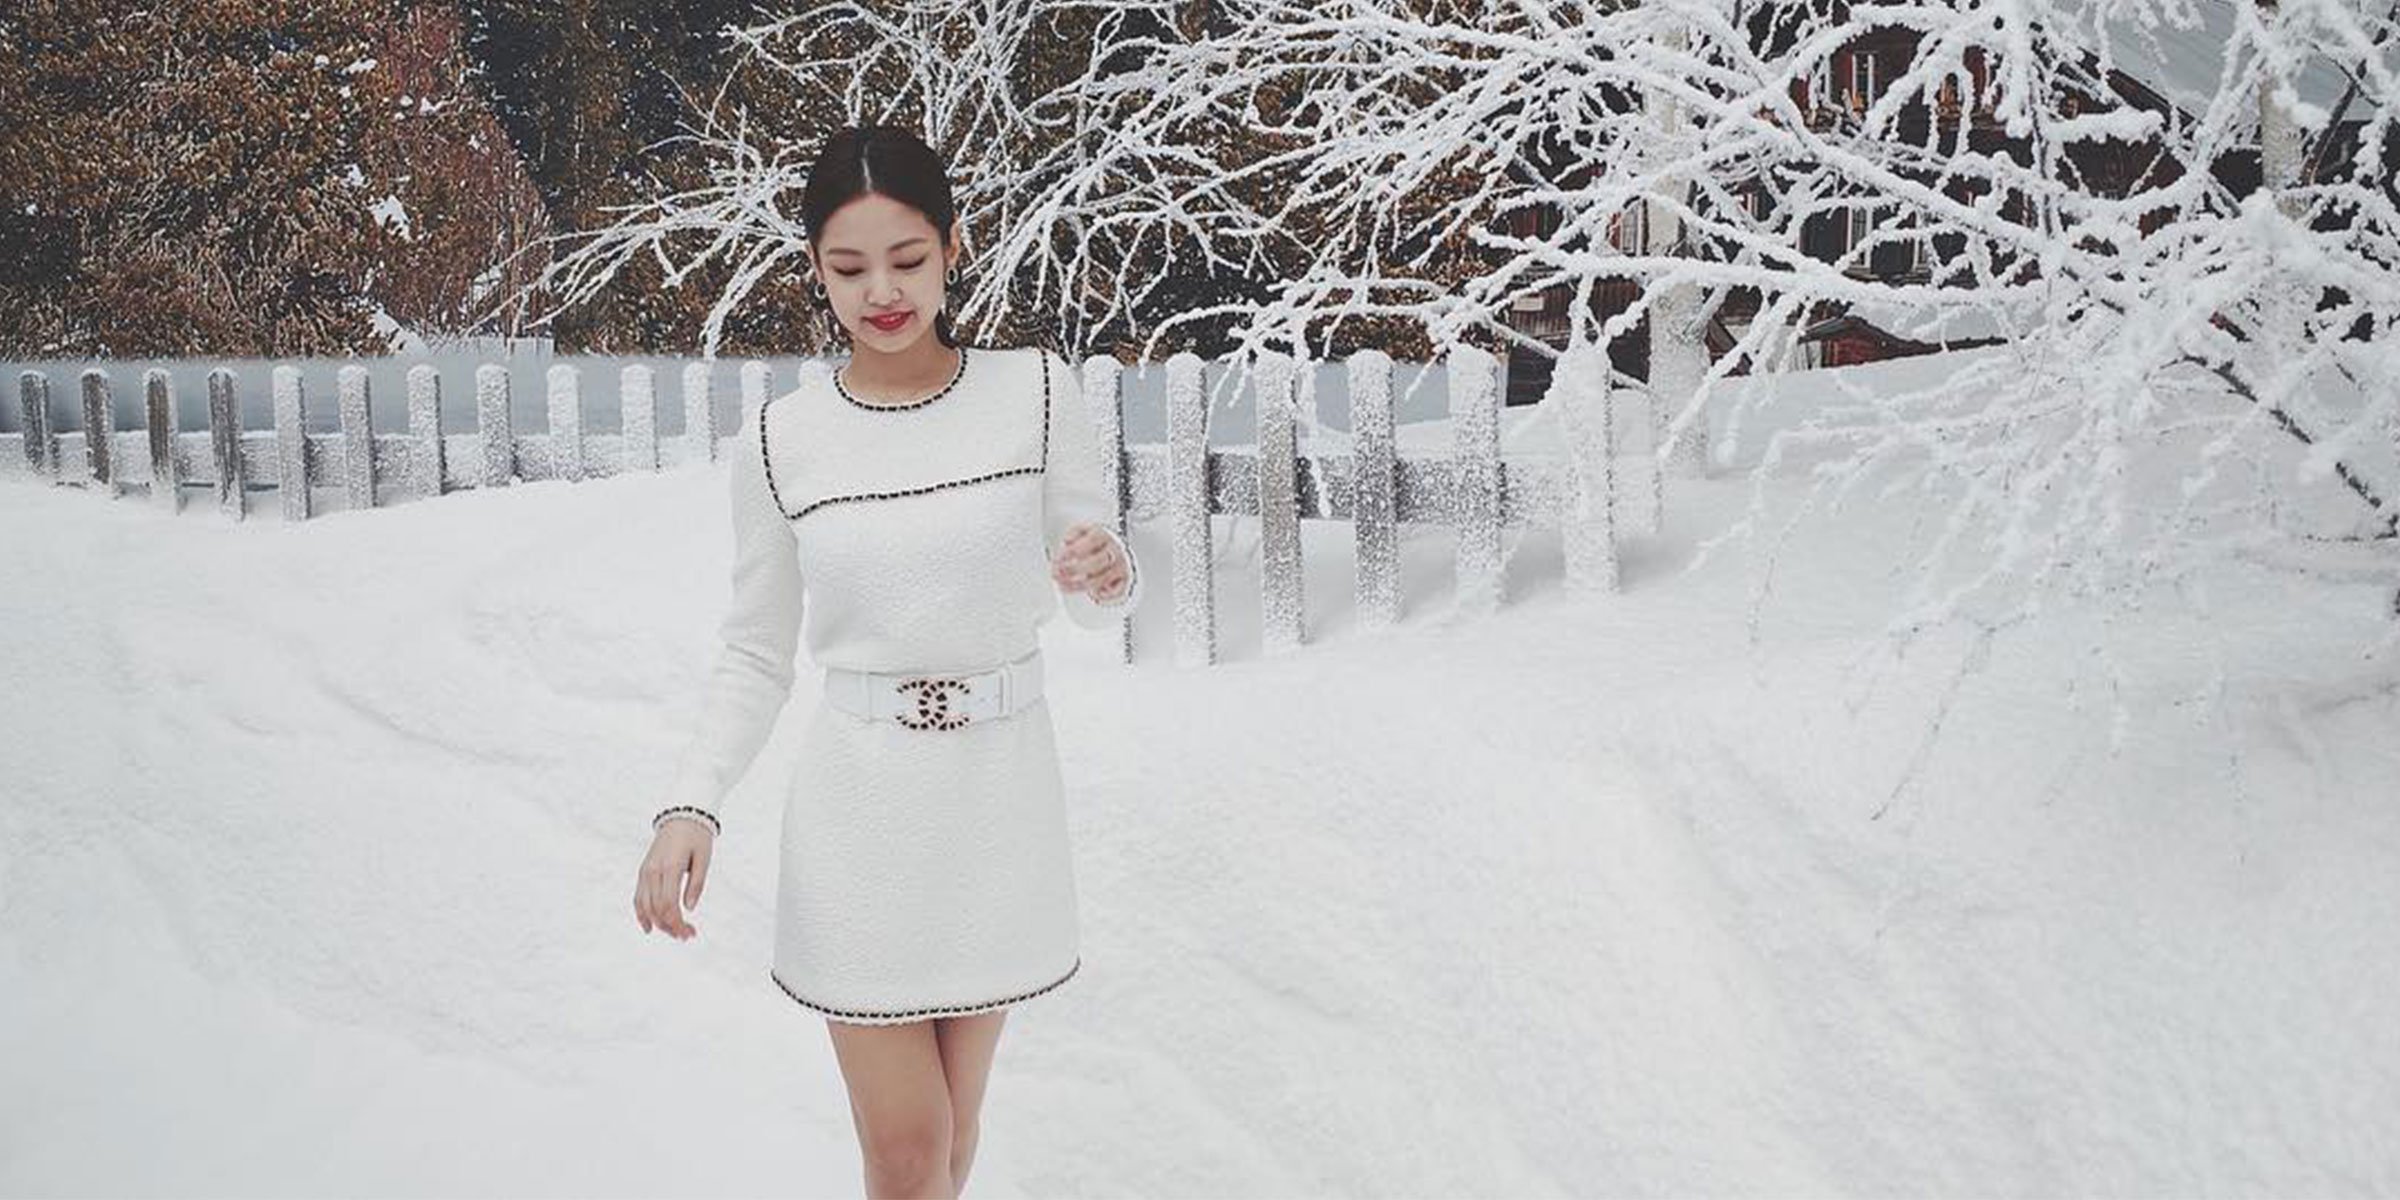 Blackpink's Jennie Named the Face of Chanel's New Coco Neige